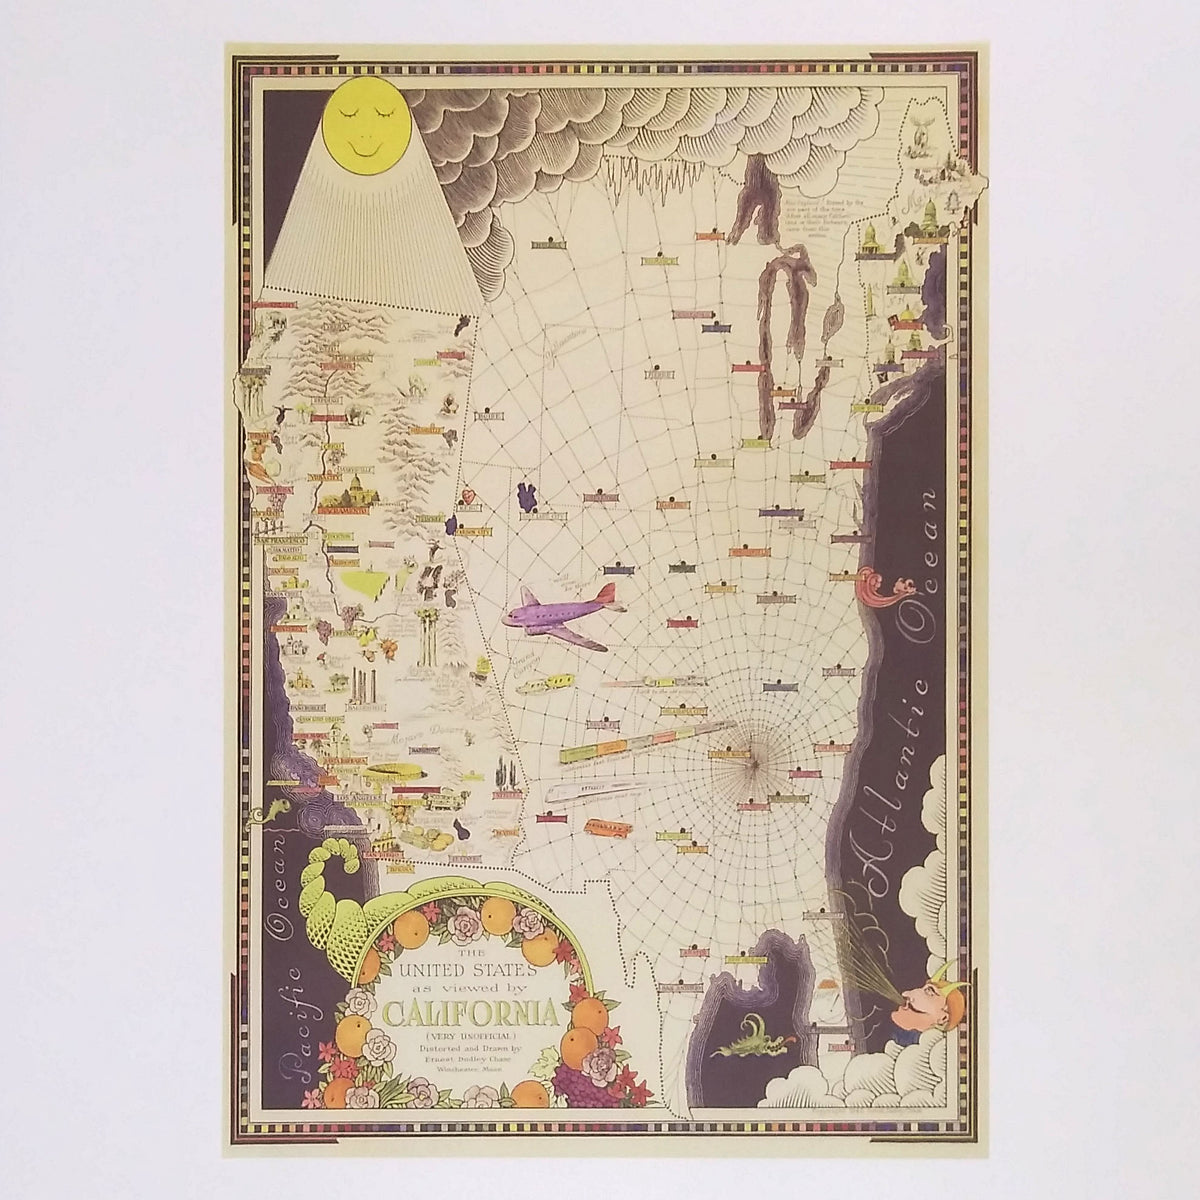 The US As Viewed by California - Vintage Map Reproduction